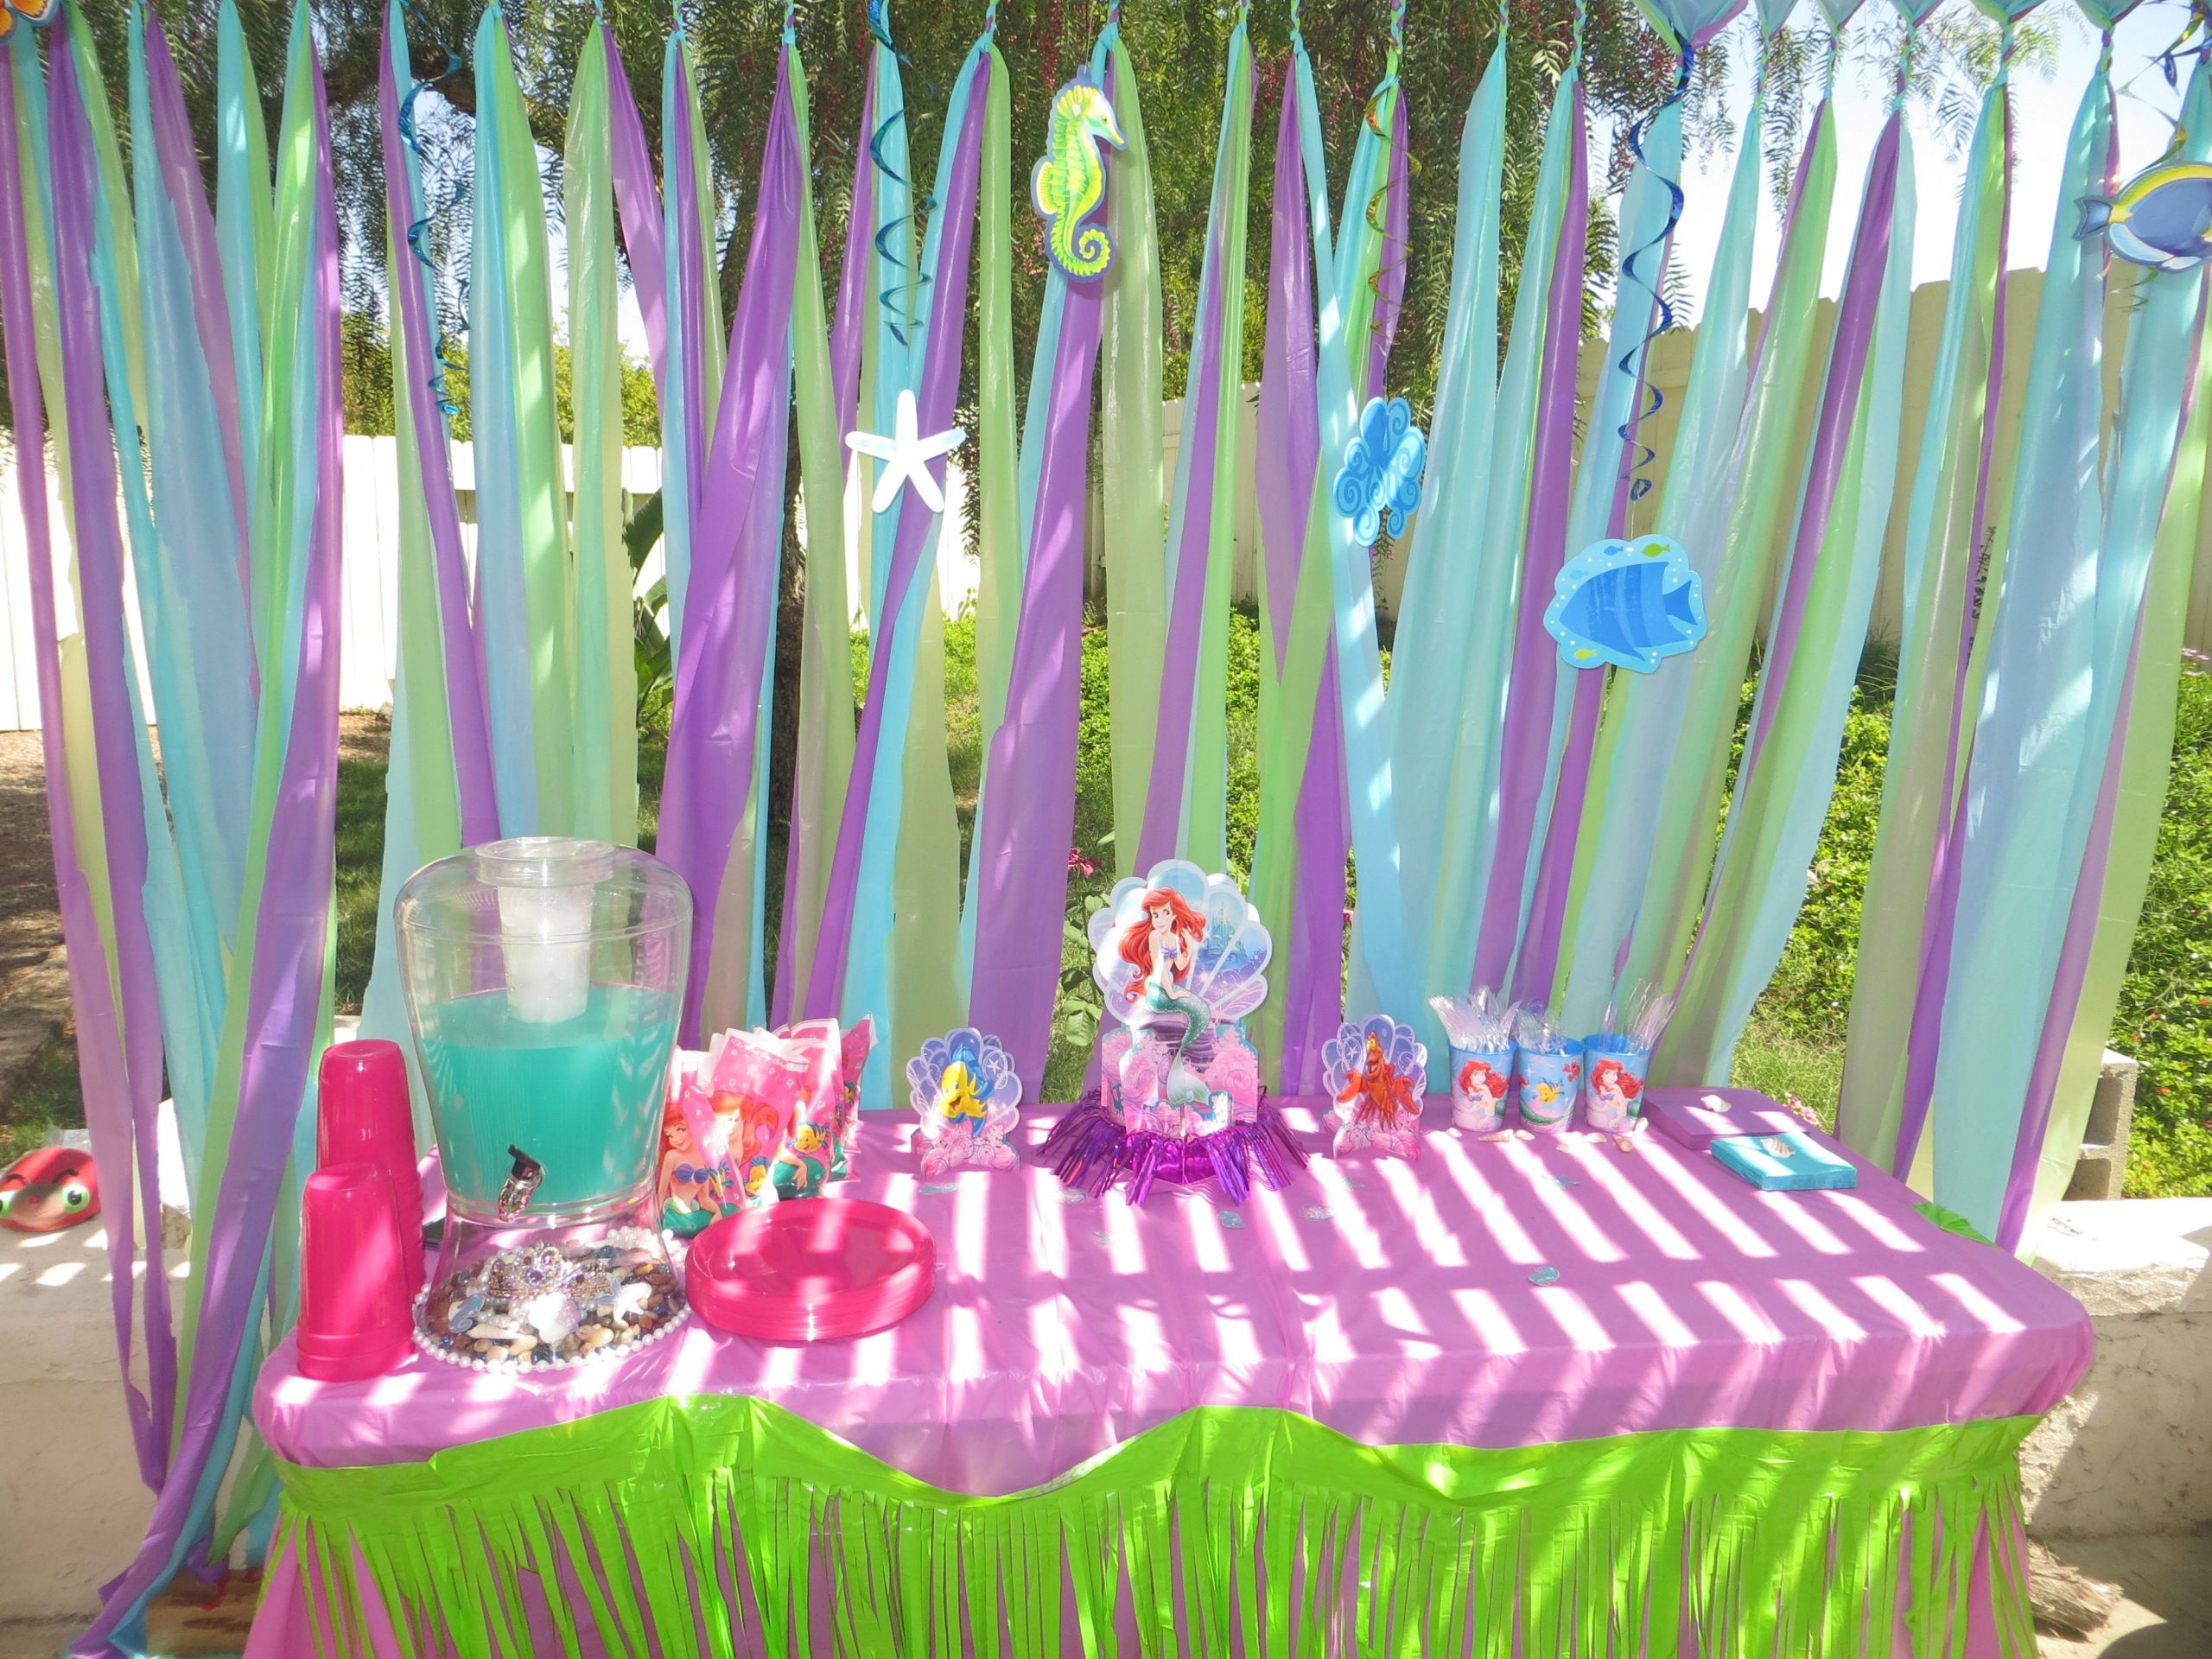 Ariel Little Mermaid Party Ideas
 Arianna s 3rd birthday party decorations The little